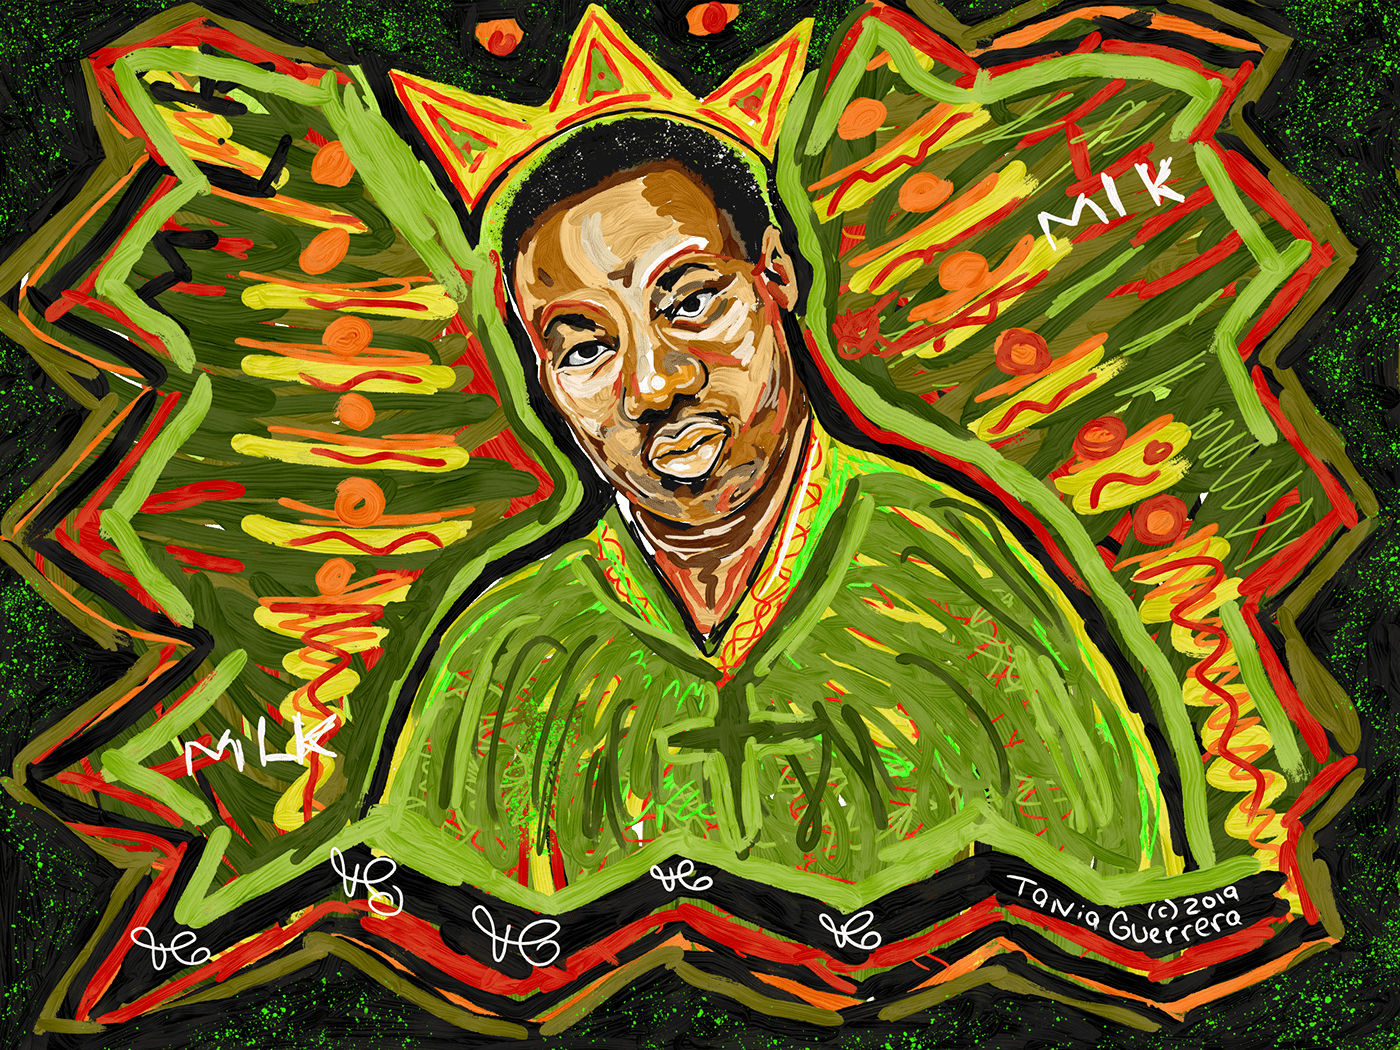 Digital portrait painting of Martin Luther King.